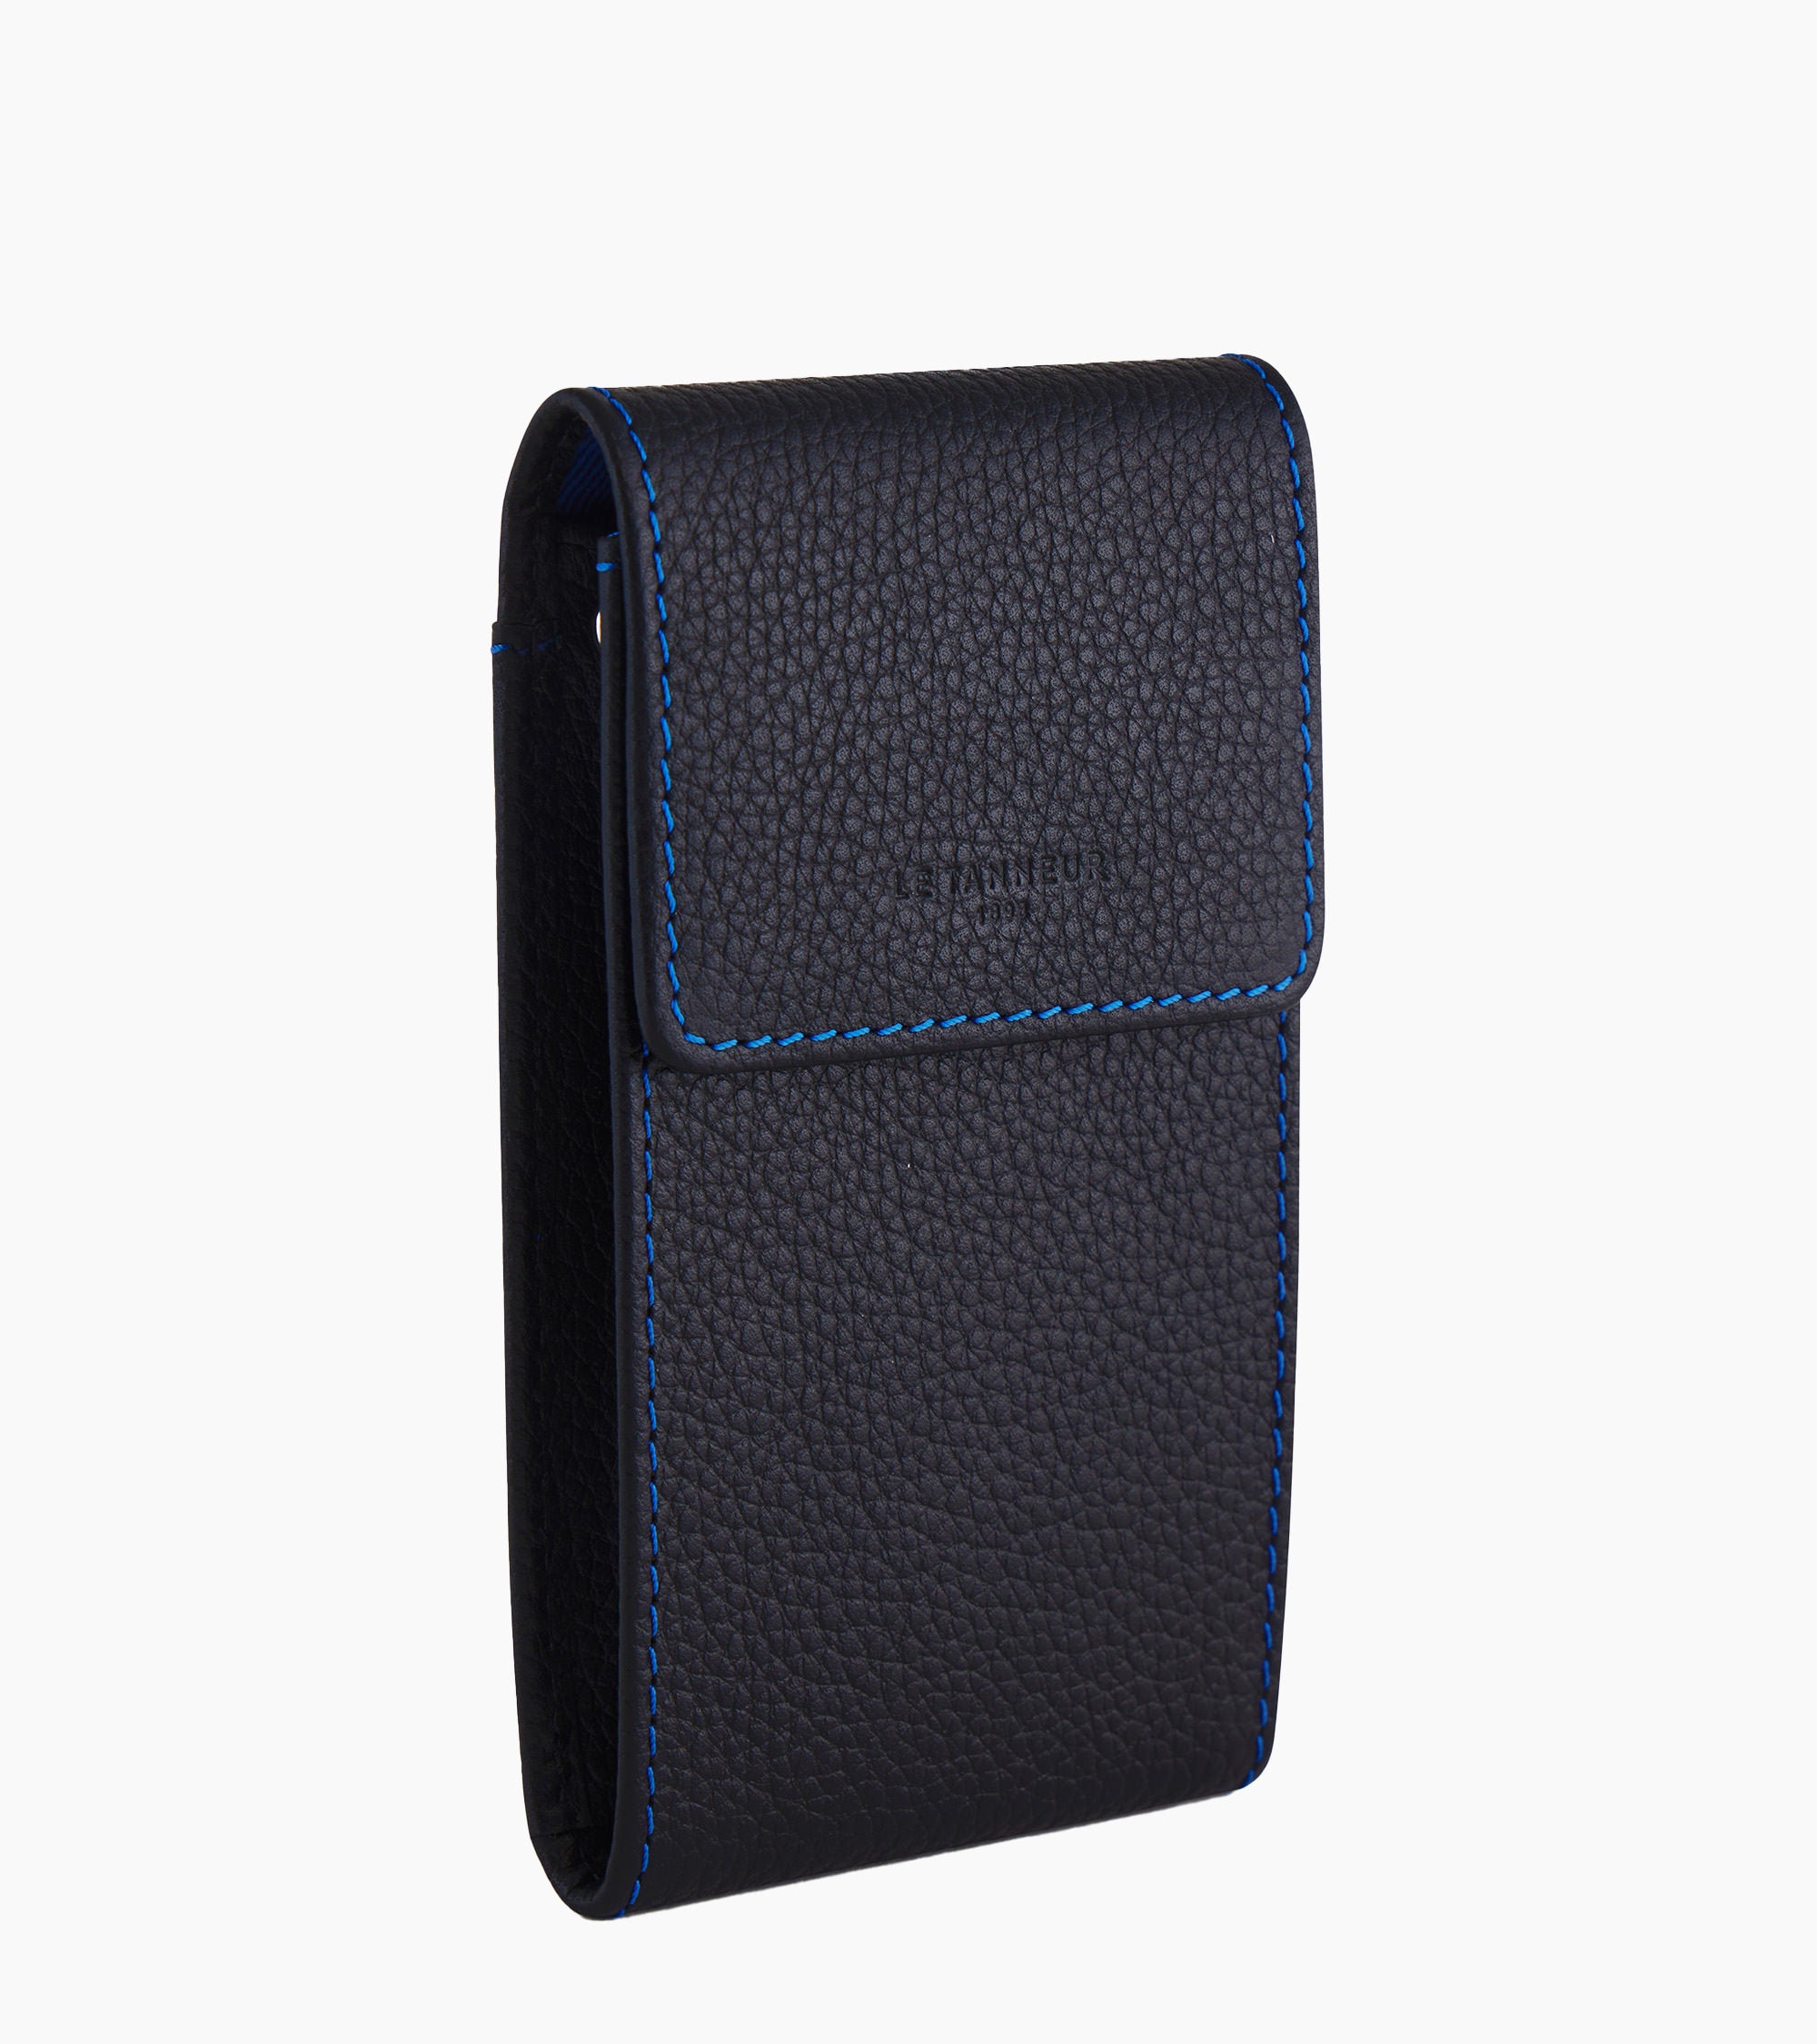 Charles key case with flap closure in pebbled leather